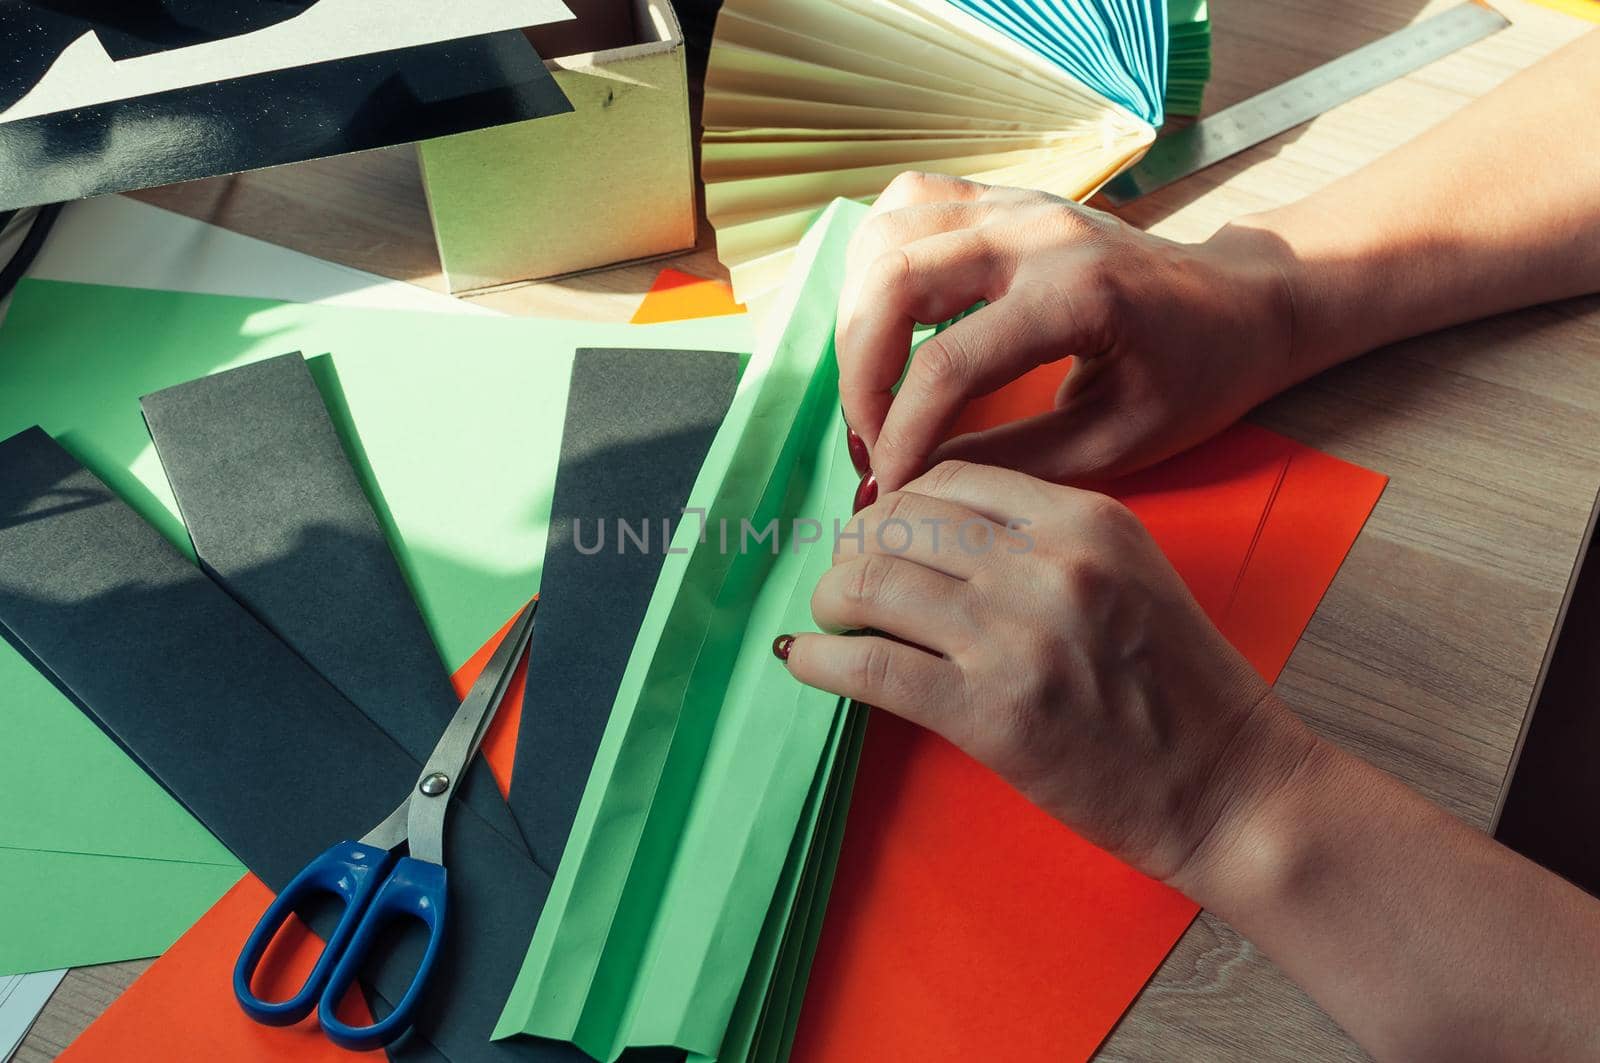 In the foreground, female hands are preparing blanks for an origami fan, sheets of colored paper, scissors on a wooden table. Several blanks for a fan. Template for design, advertising or text.